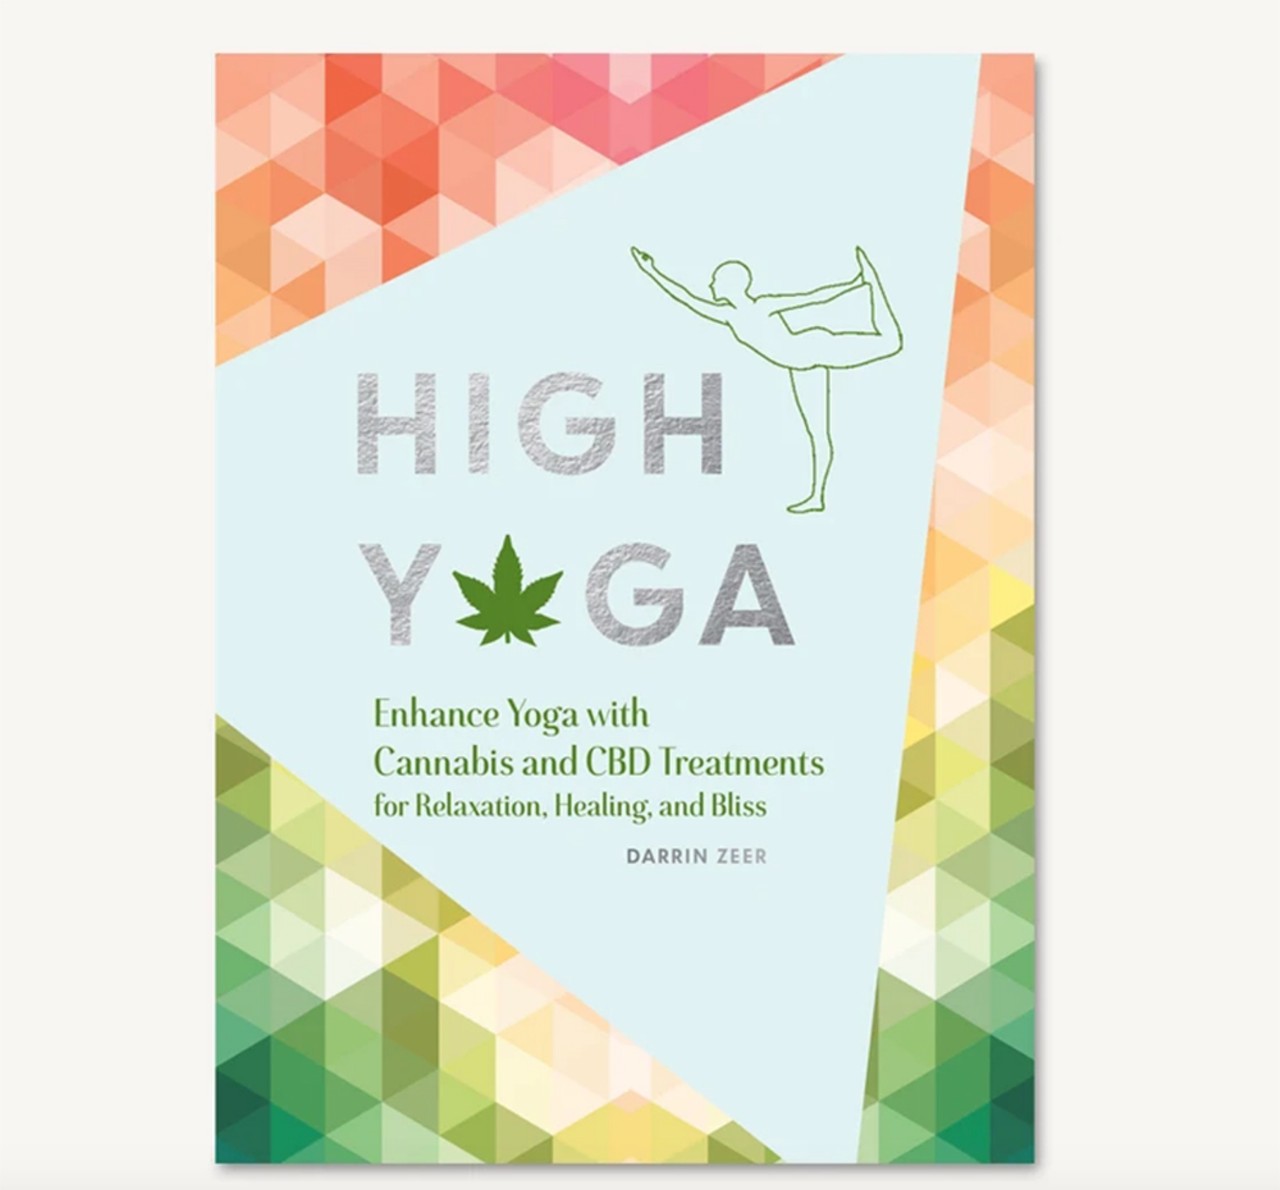 For those who want to take their yoga practice to a higher level
High Yoga, $19
Skymint, 20940 John R. Rd., Hazel Park; 313-379-5369 | 1958 S. Industrial Hwy., Ann Arbor; 734-627-7360; skymint.com
It might seem a bit counterintuitive to combine smoking and an ancient physical and spiritual practice built on the foundation of controlled deep breathing, but when it comes to weed and yoga, it&#146;s a match made in your respective heaven. So while you&#146;re at Skymint loading up on all things weed, grab a copy of High Yoga, which offers easy-to-follow instructions with illustrations demonstrating poses that are paired with weed strain recommendations. The book, which also offers tips on how to consume safely, provides some valuable info on the many therapeutic benefits of combining weed and yoga. It&#146;s basically like unlocking a superpower you didn&#146;t know you had. Namaste!